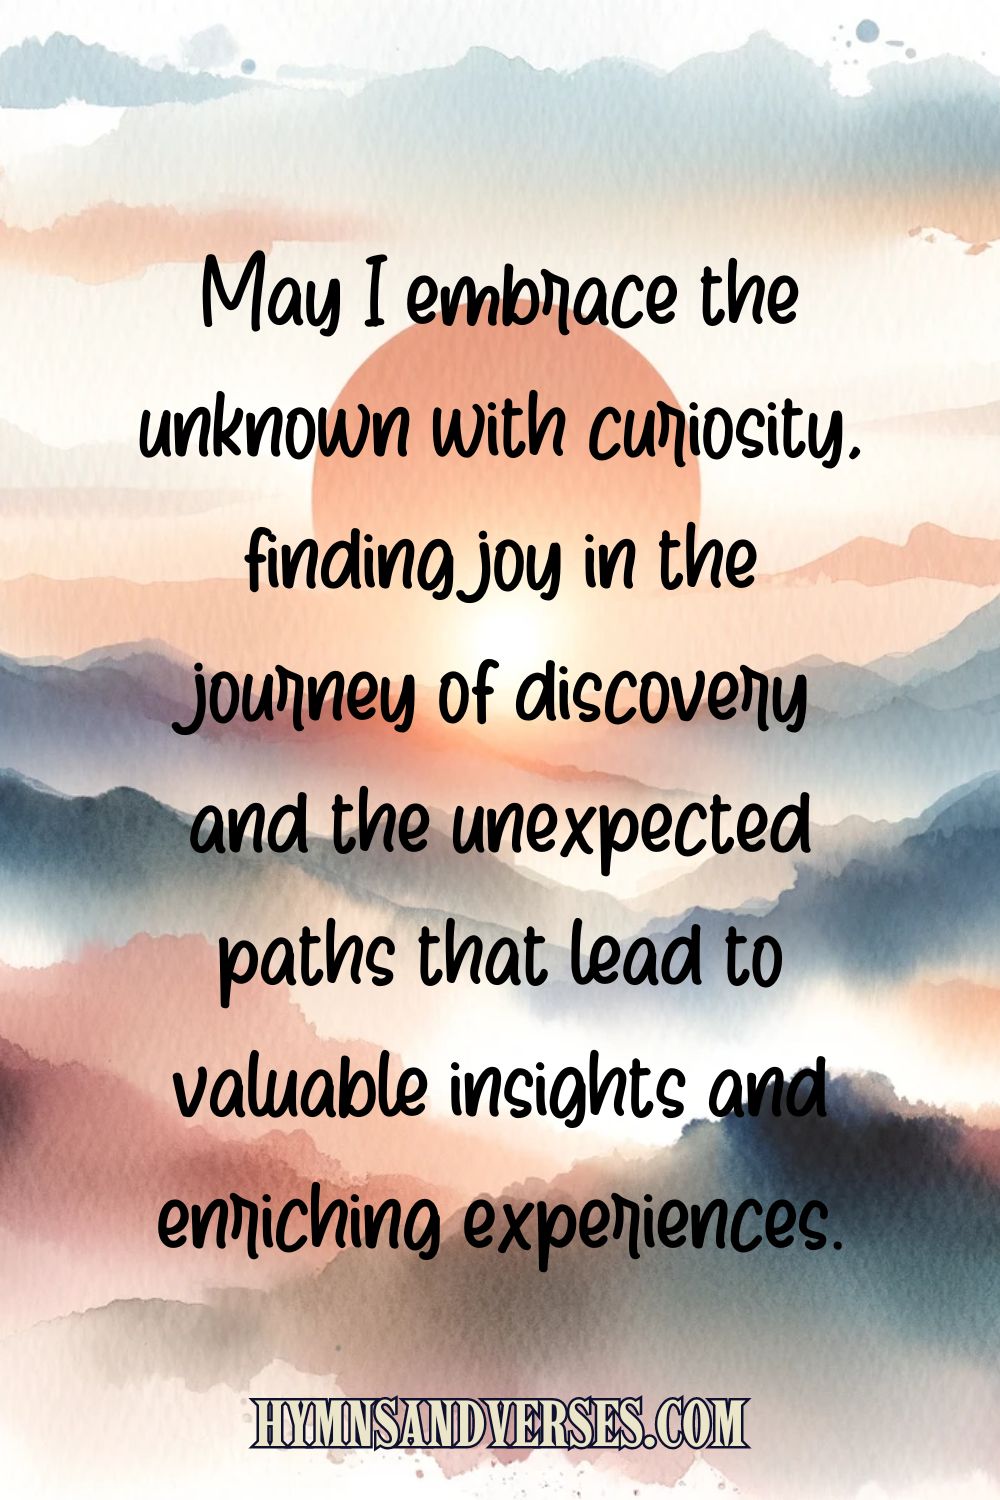 Quote image featuring: . May I embrace the unknown with curiosity, finding joy in the journey of discovery and the unexpected paths that lead to valuable insights and enriching experiences.